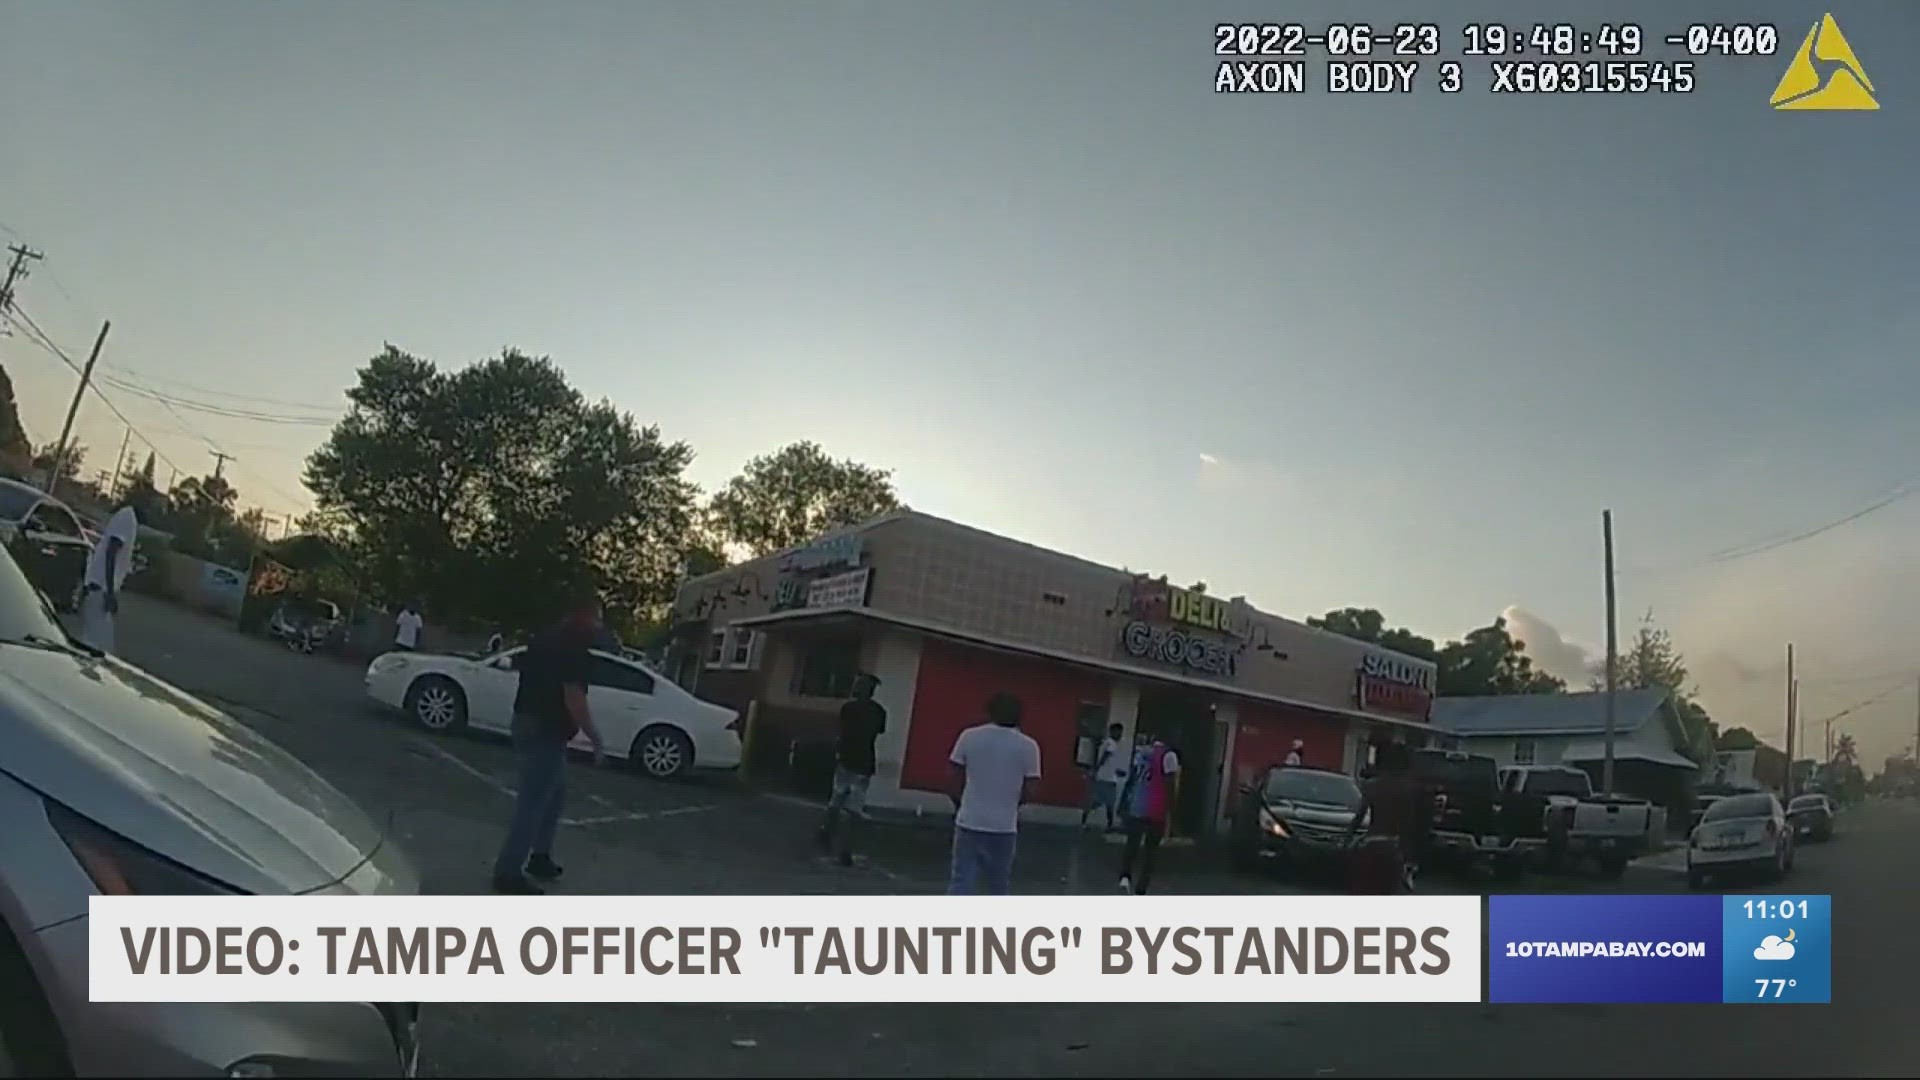 Tampa Chief Lee Bercaw said the officer was disciplined and moved to a different neighborhood. After seeing the video, the NAACP is calling for further action.